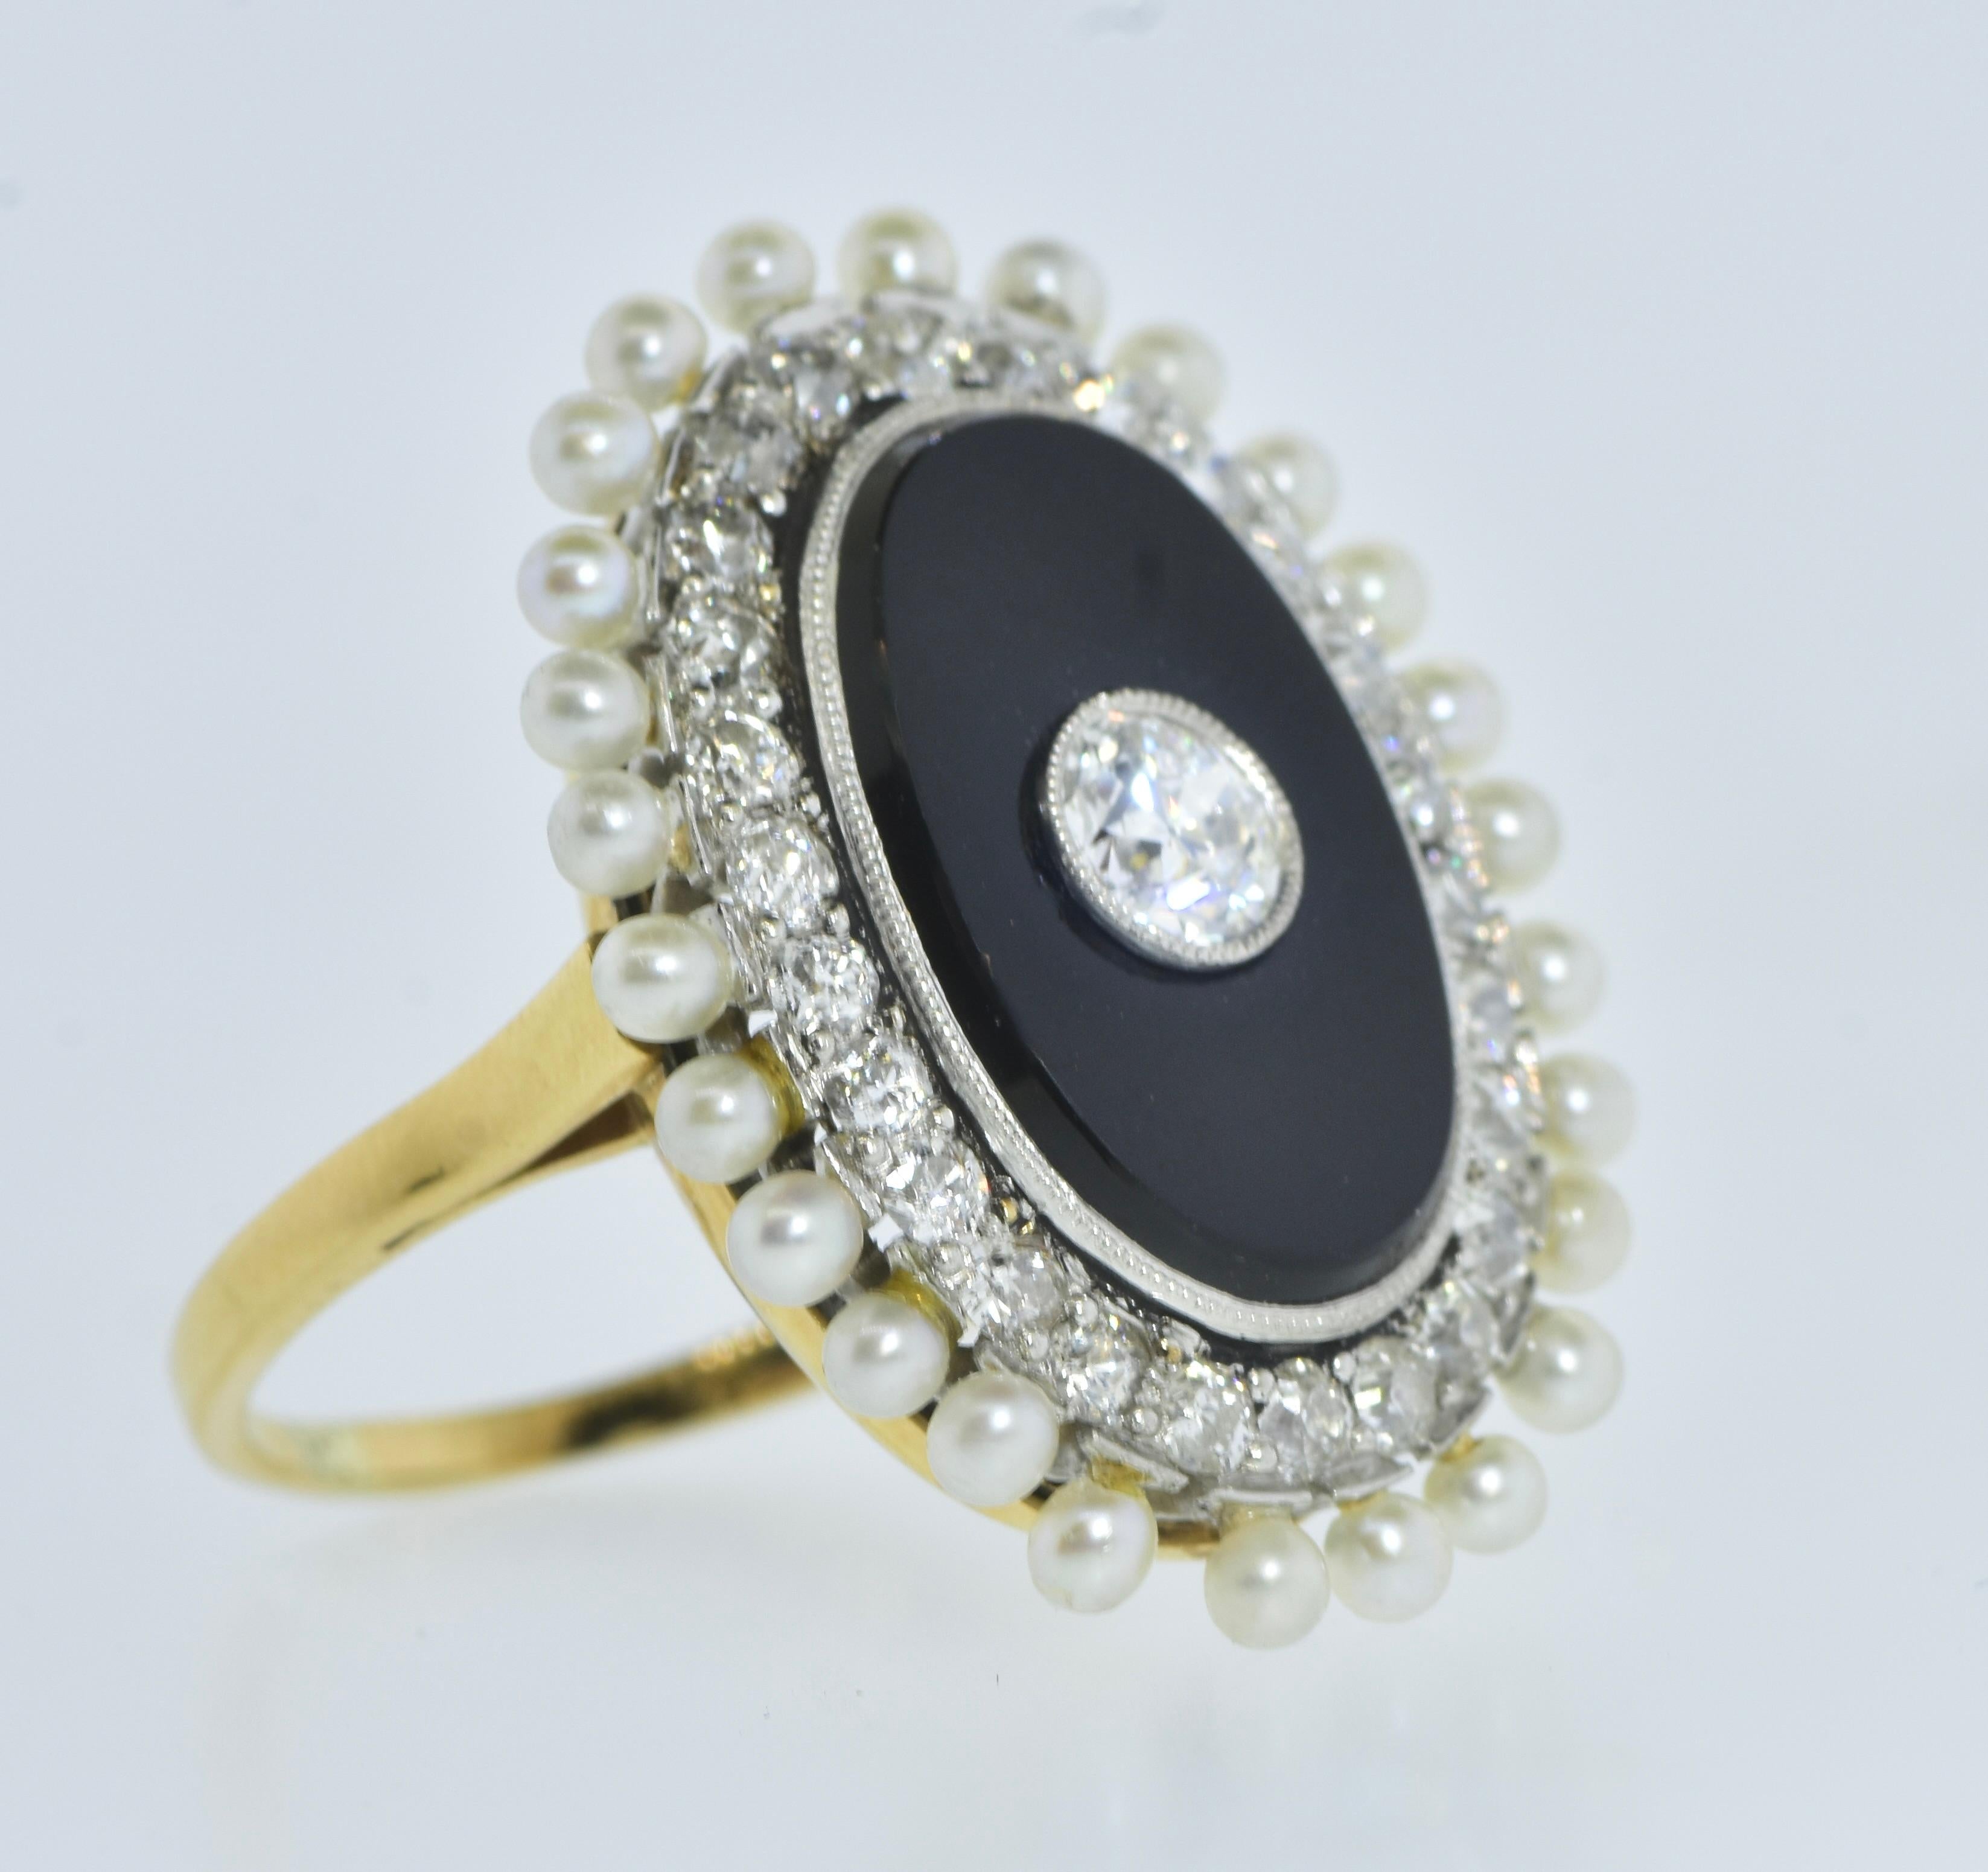 Edwardian Antique Onyx, Diamond & Natural Oriental Pearl in Platinum and Gold Ring c. 1900 For Sale